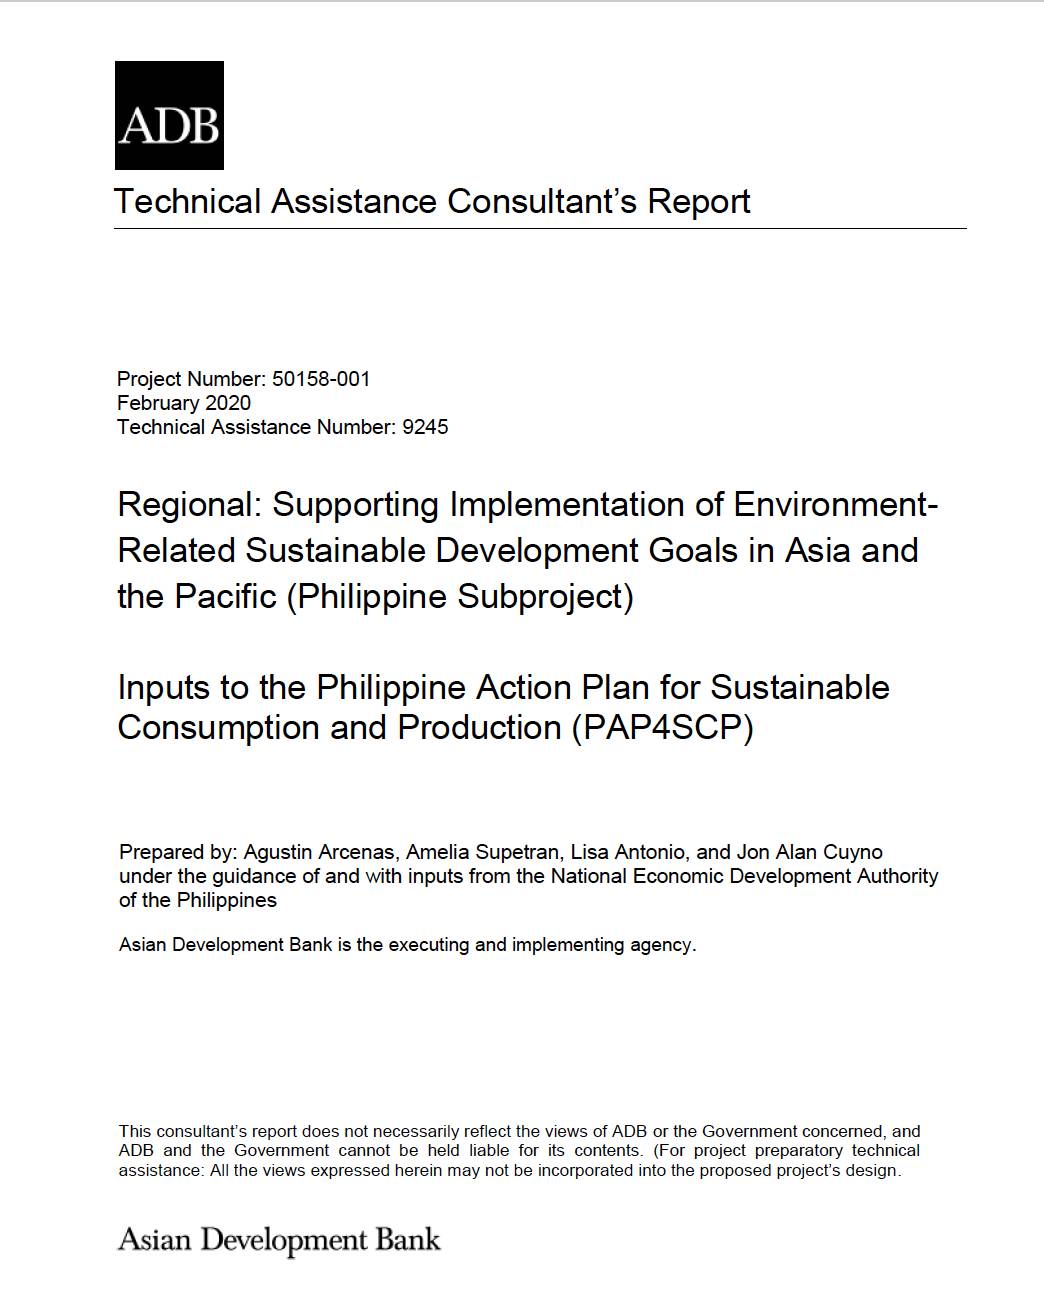 Inputs to the Philippine Action Plan for Sustainable Consumption and Production (PAP4SCP)